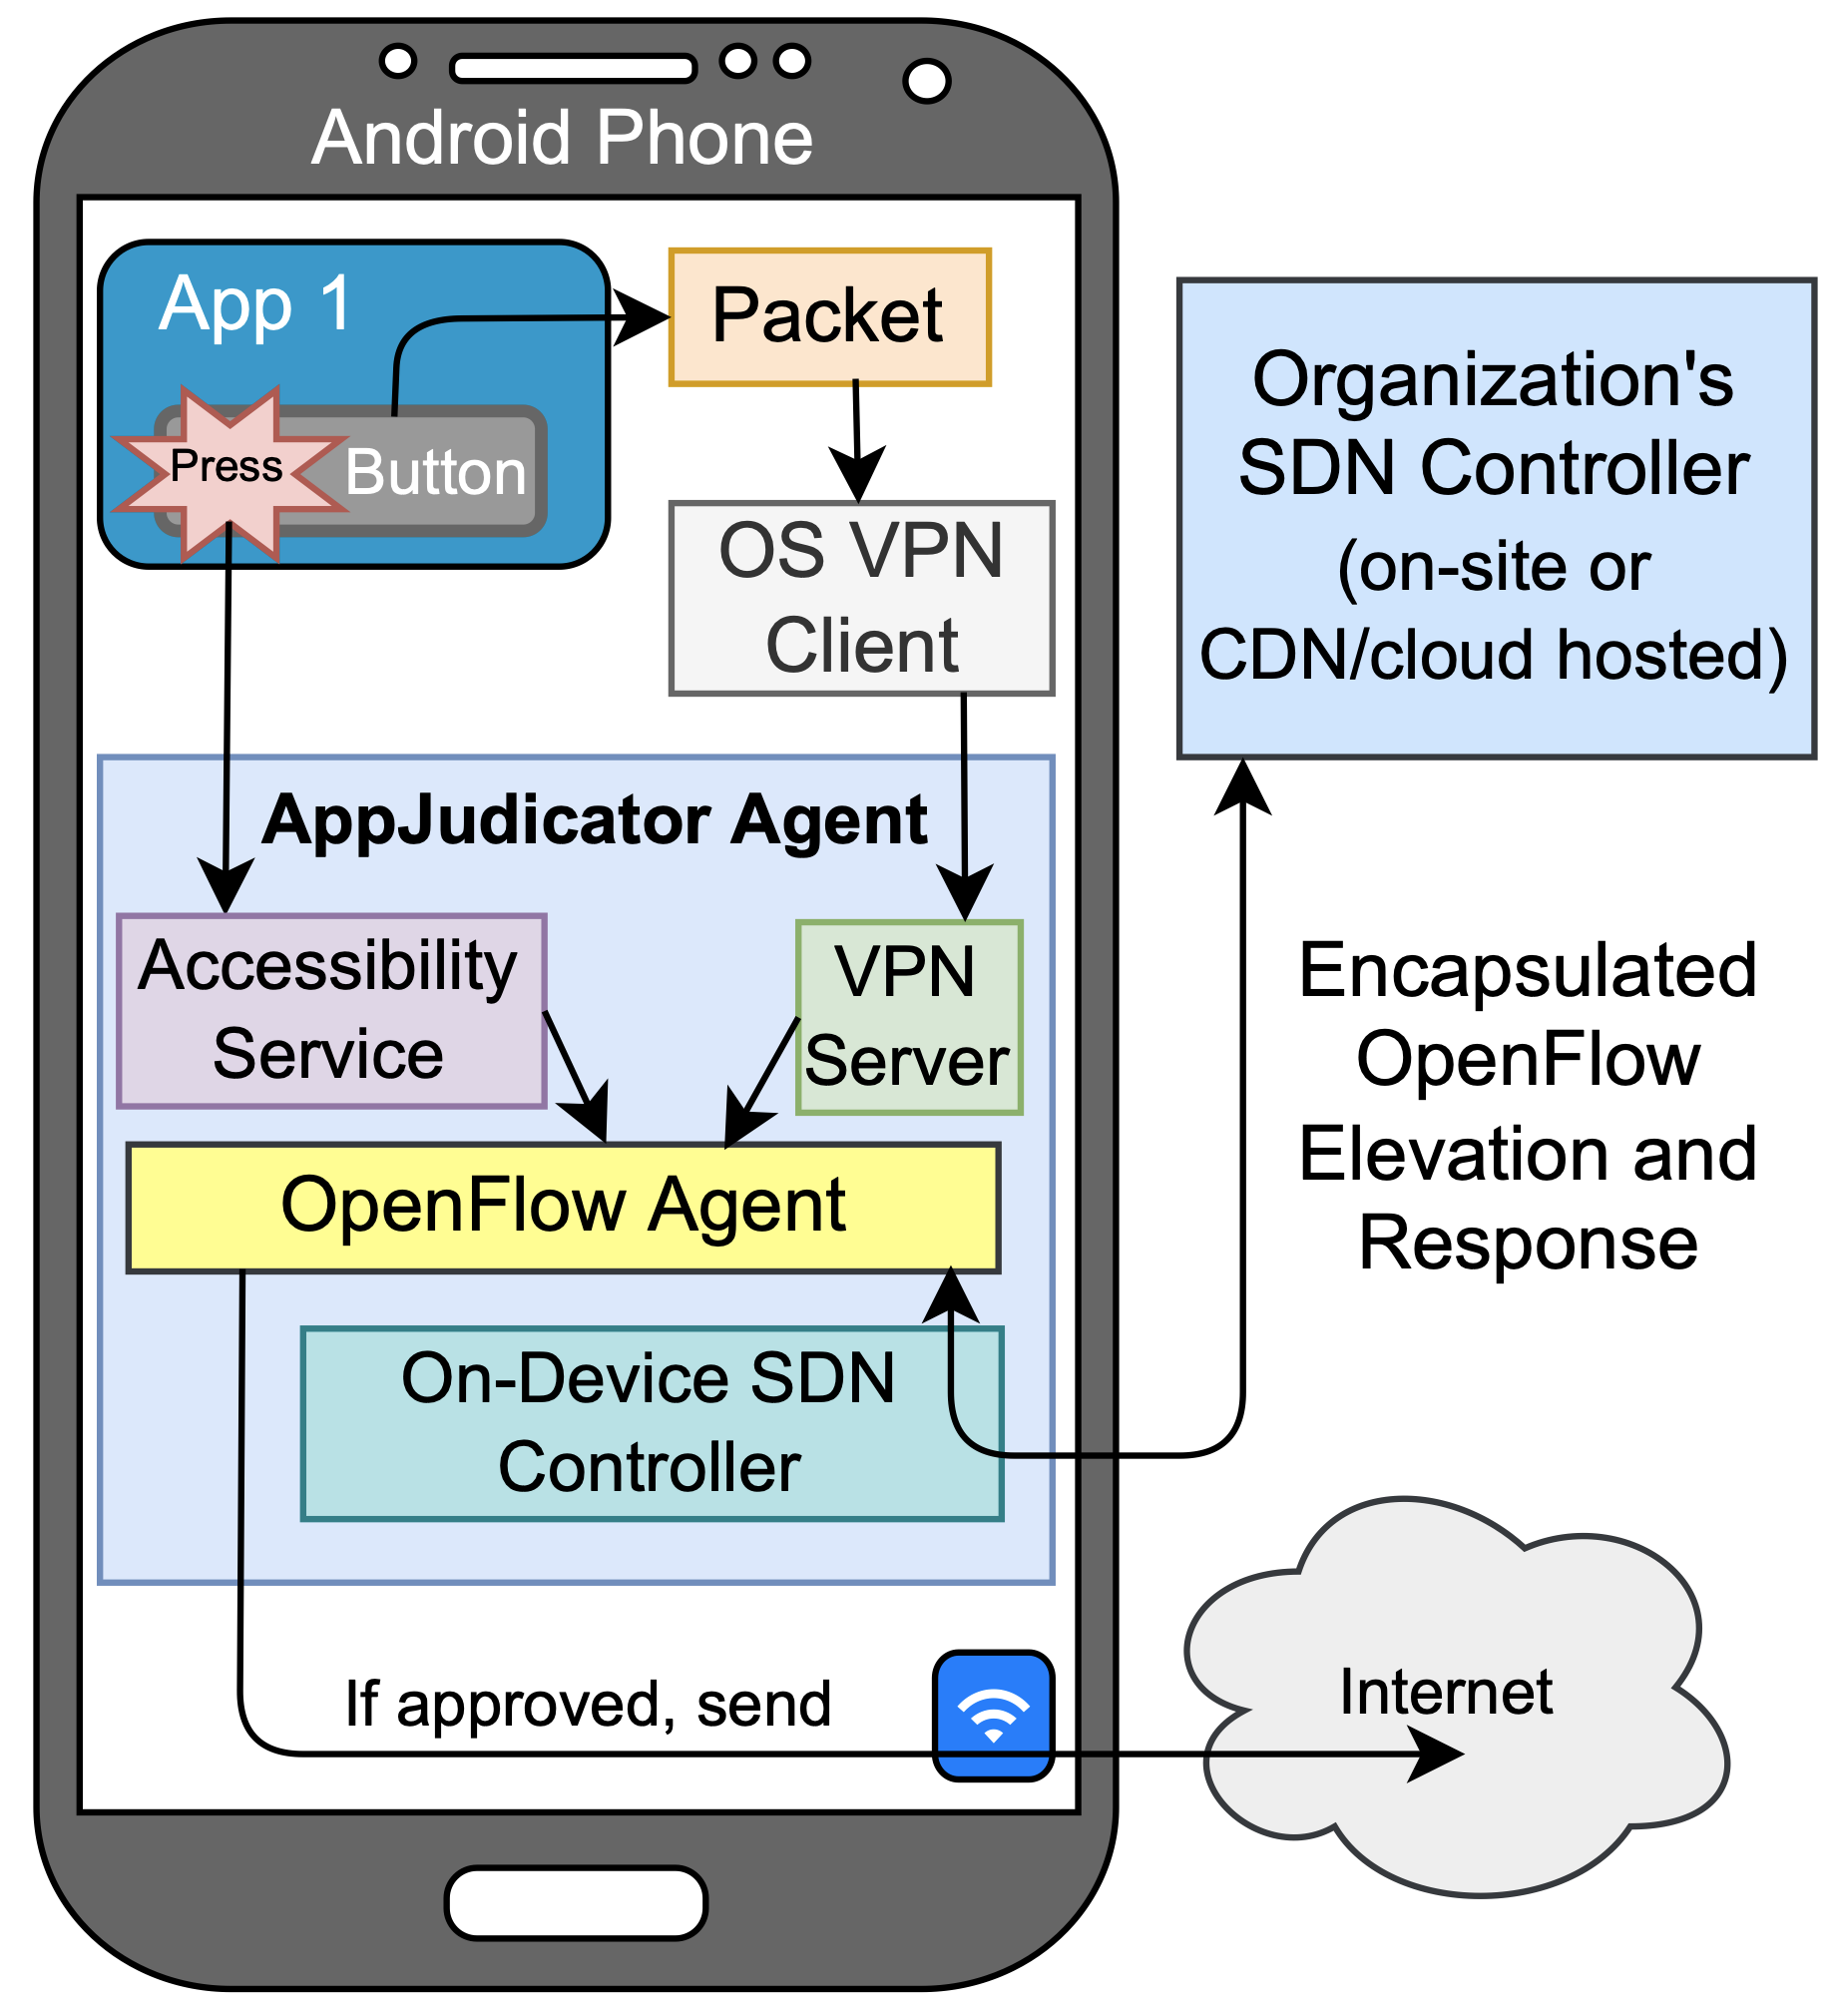 Mobile Device Security Research Project